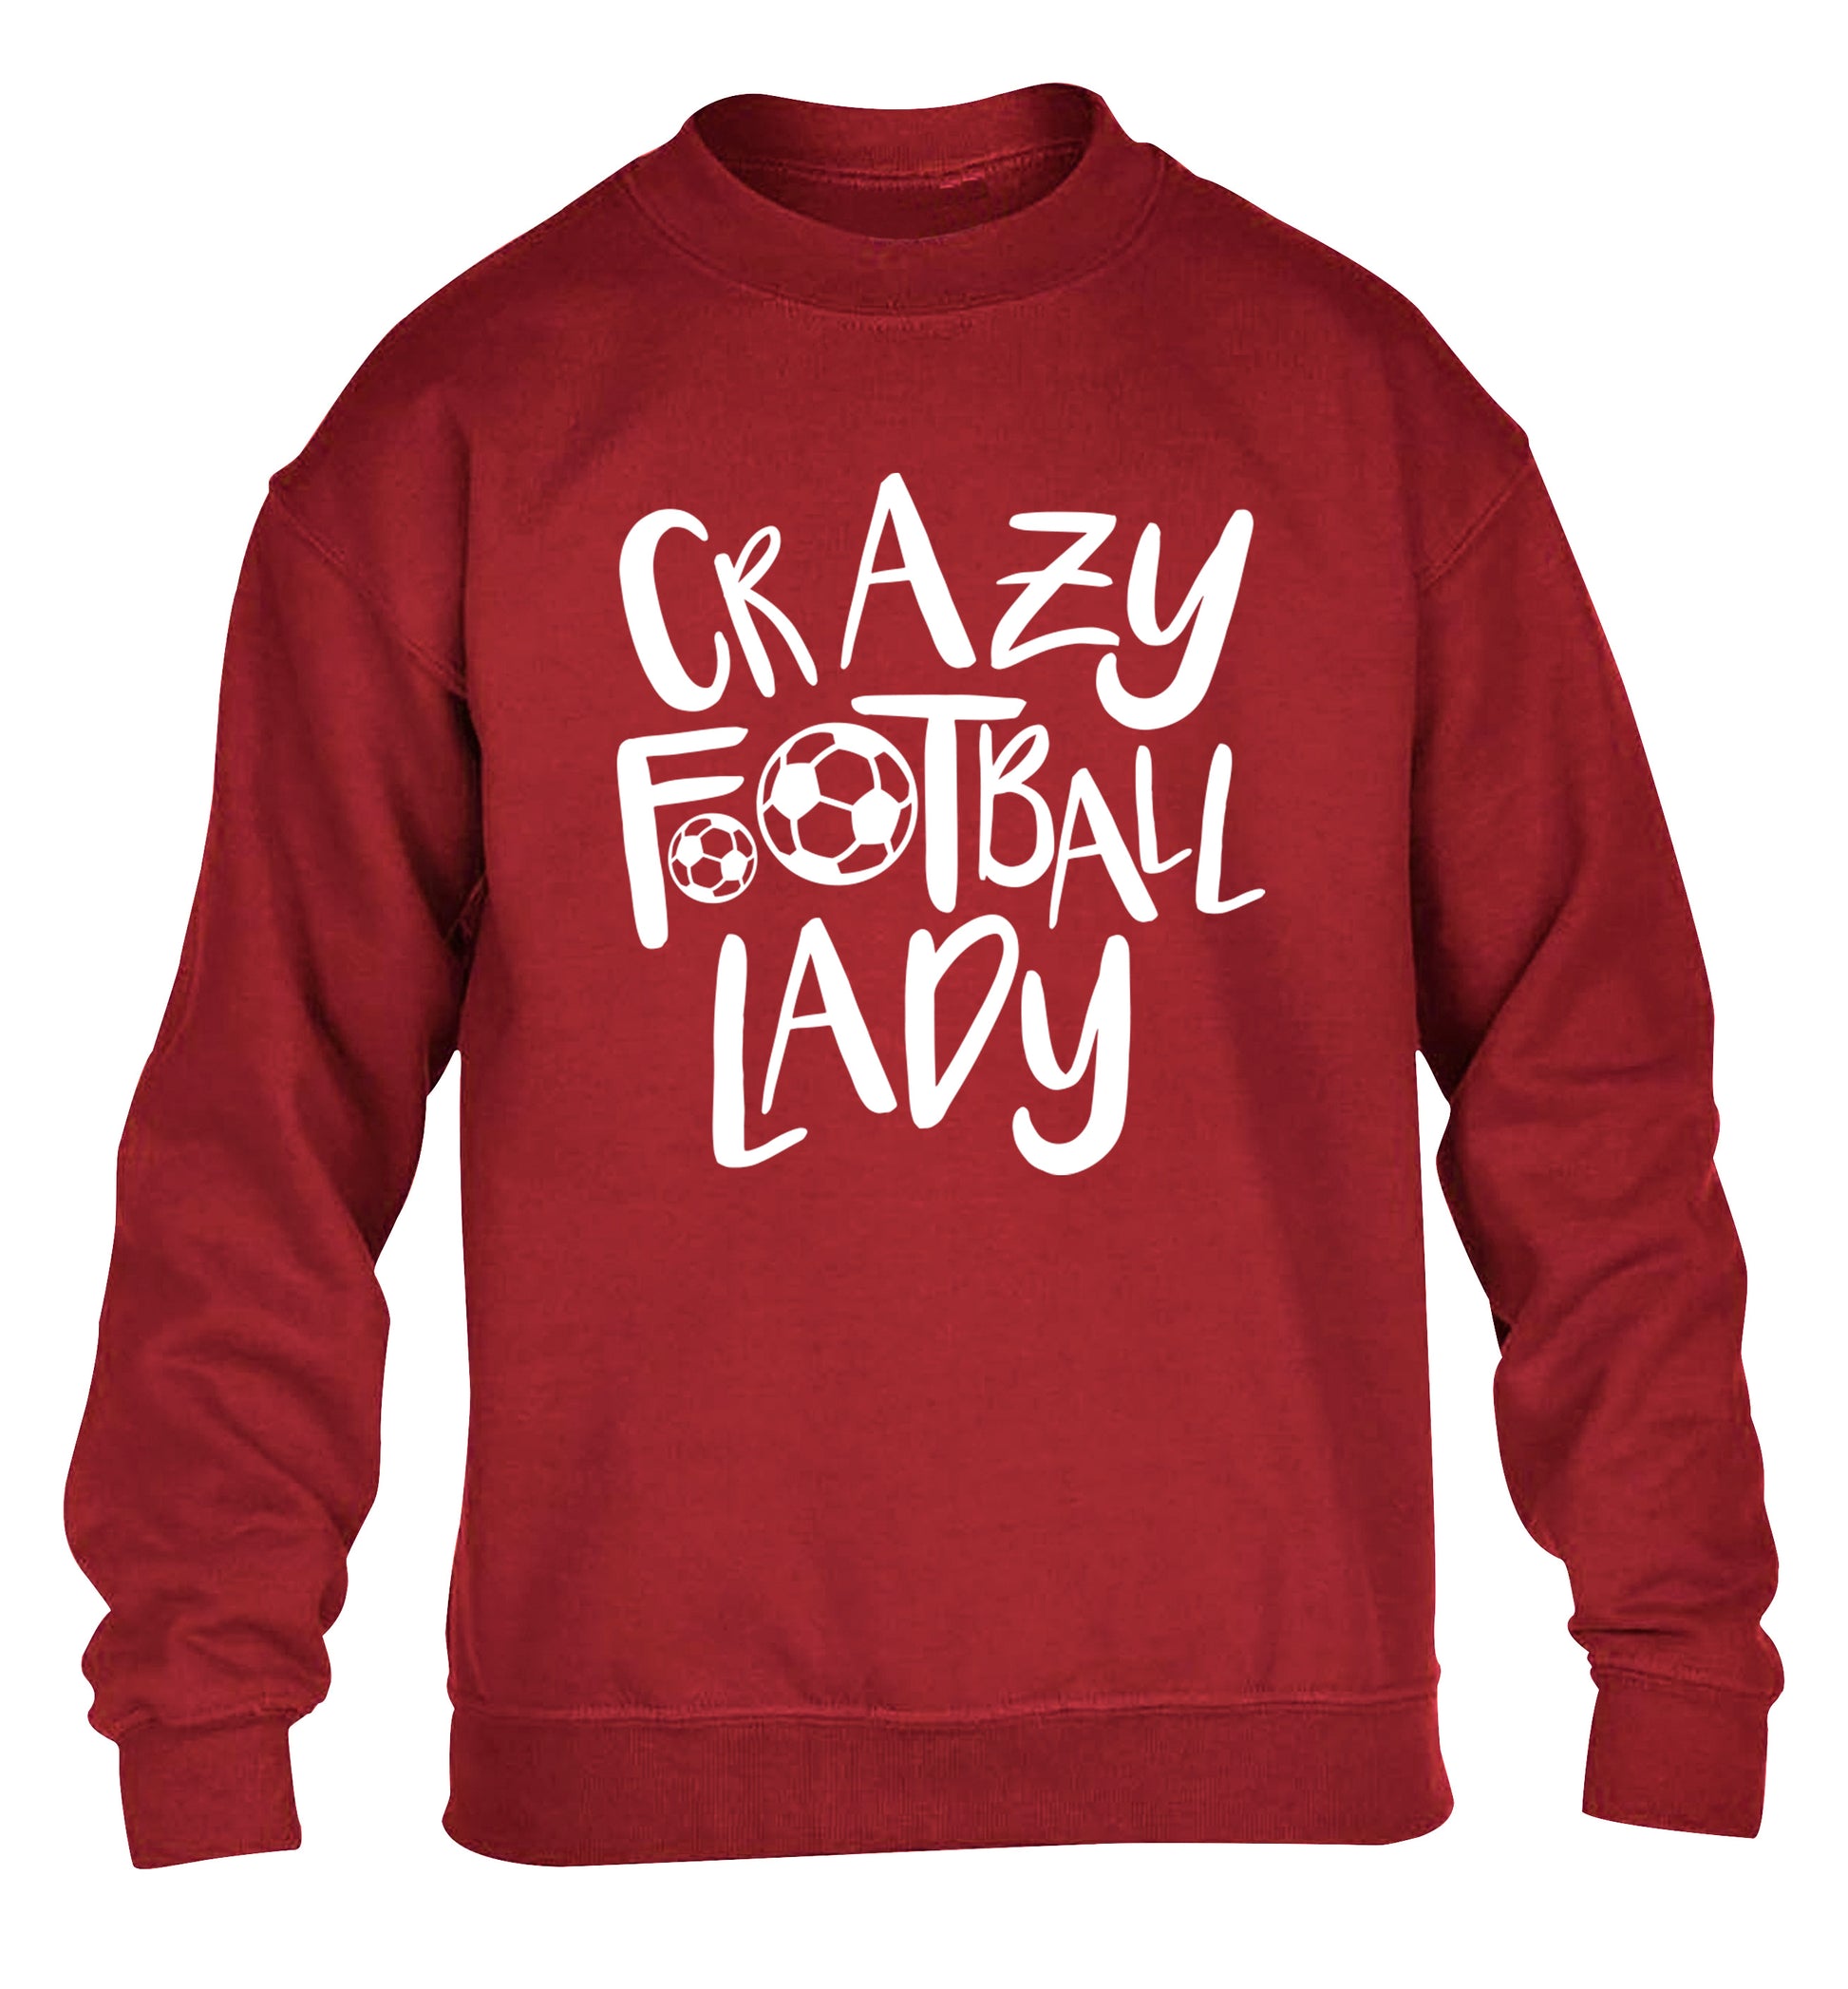 Crazy football lady children's grey sweater 12-14 Years